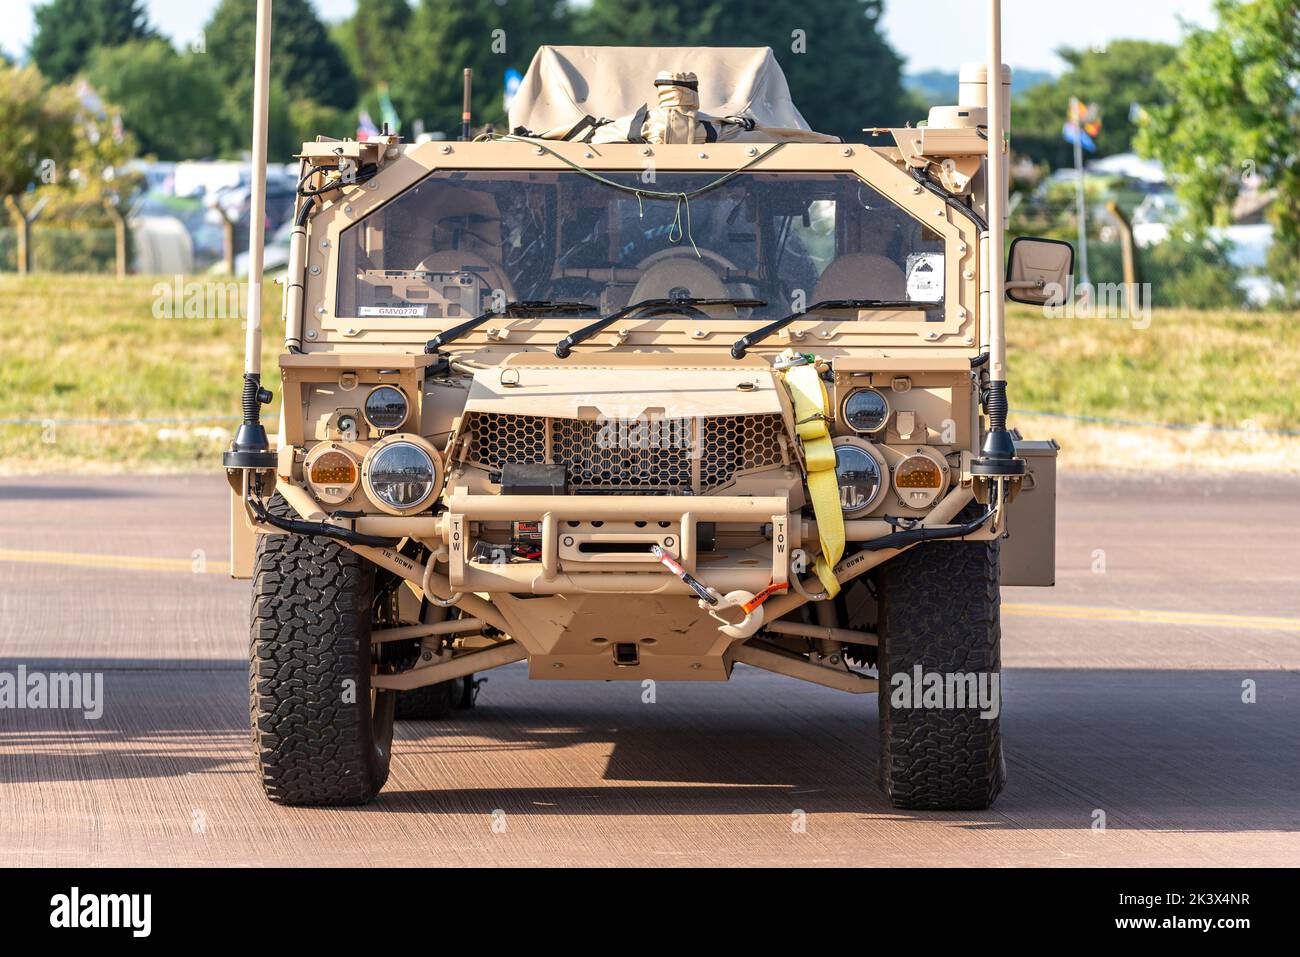 U.S. Special Operations Command M1288 GMV 1.1 US military air transportable combat vehicle on display at the Royal International Air Tattoo, UK Stock Photo